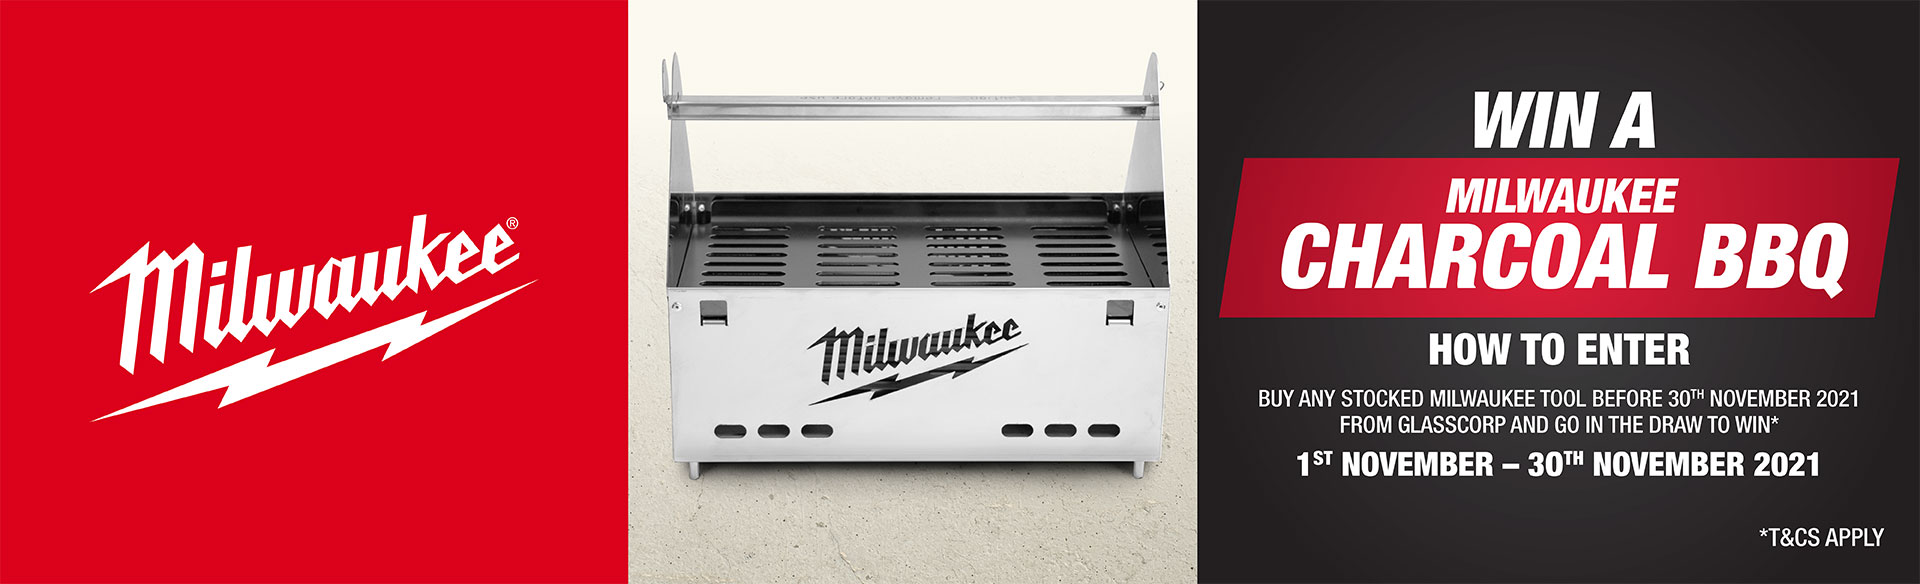 Win Milwaukee Charcoal BBQ Terms & Conditions